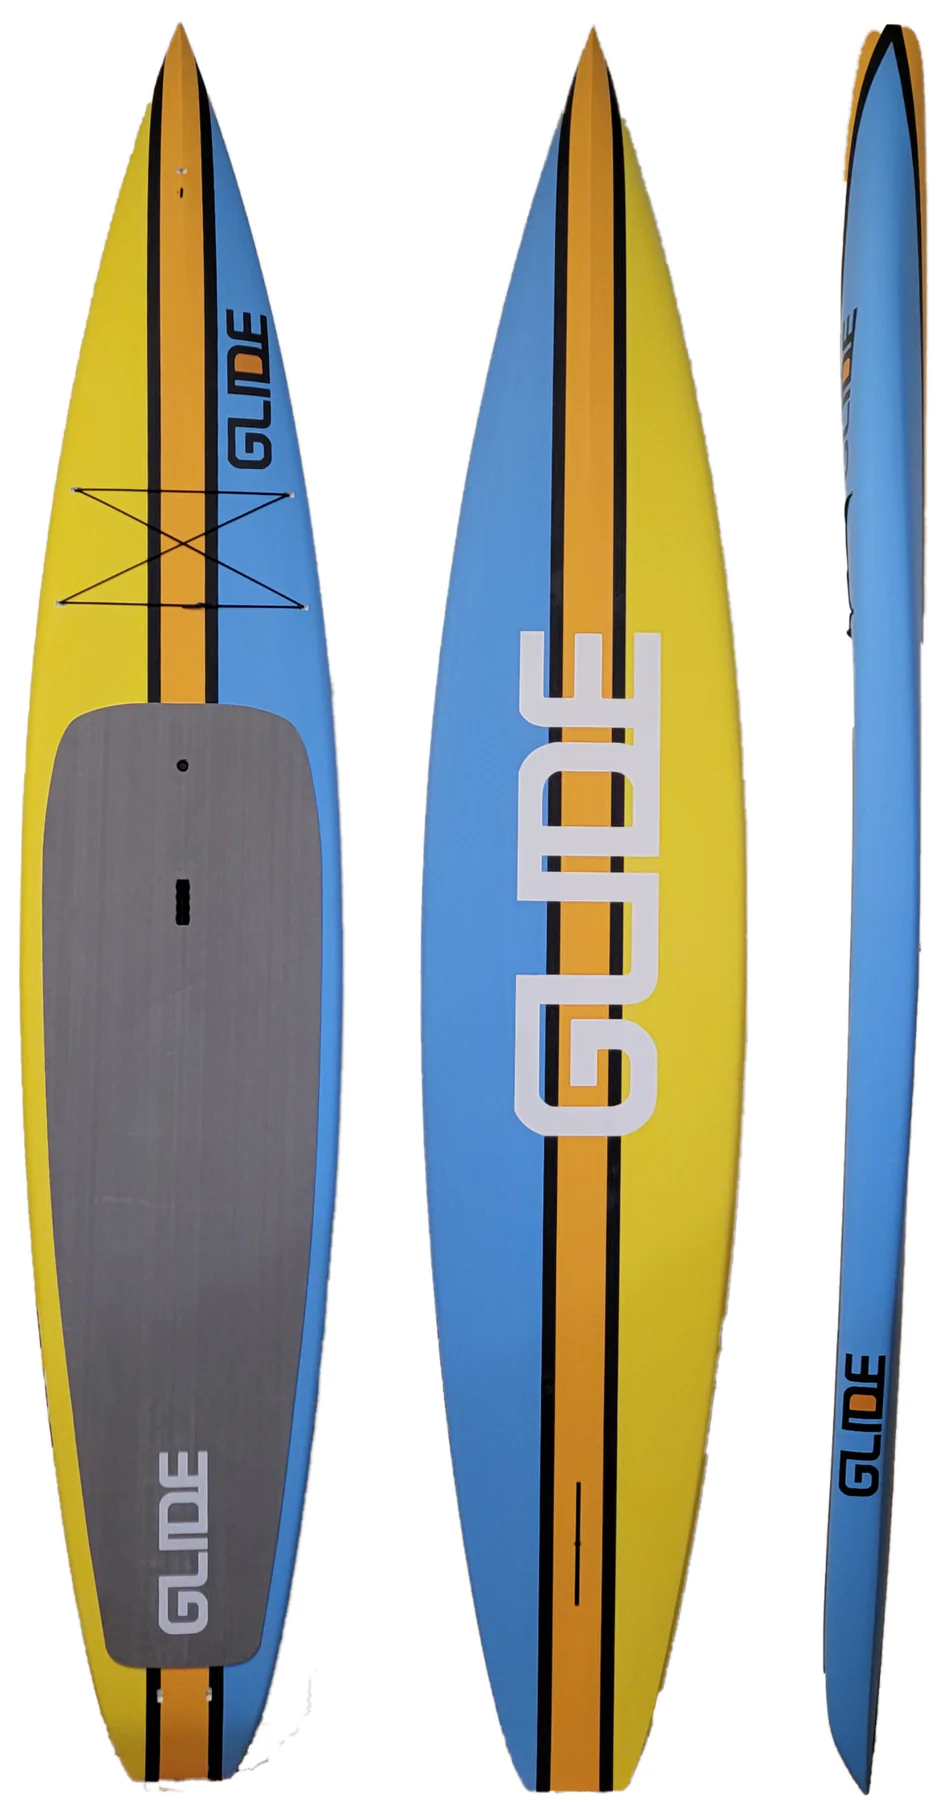 flexible rubber fins attached,right board,paddle boarding,deck pads,planing hull,detachable semi rigid fins,stand up paddle board.